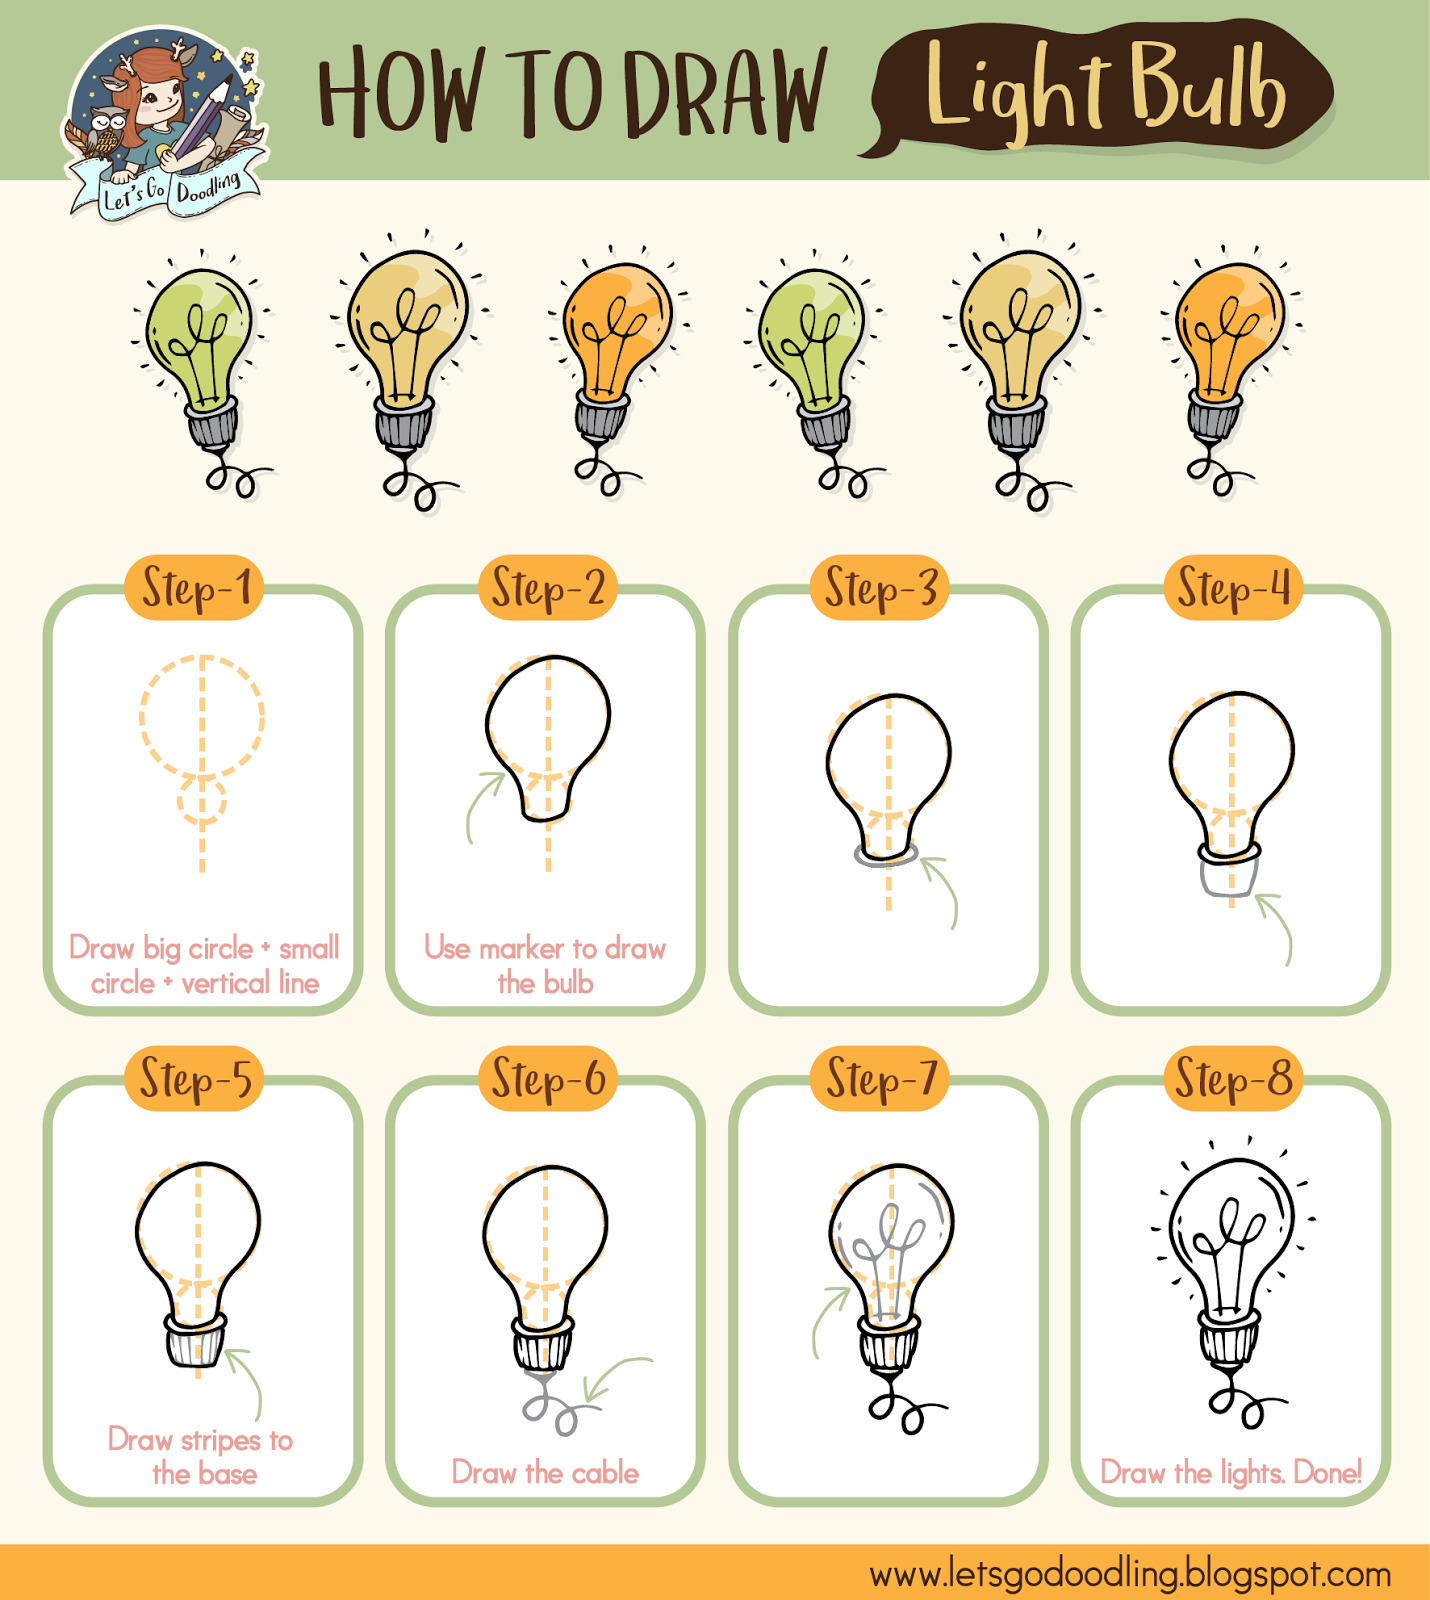 How To Draw Light Bulb Easy Step By Step Drawing Tutorial